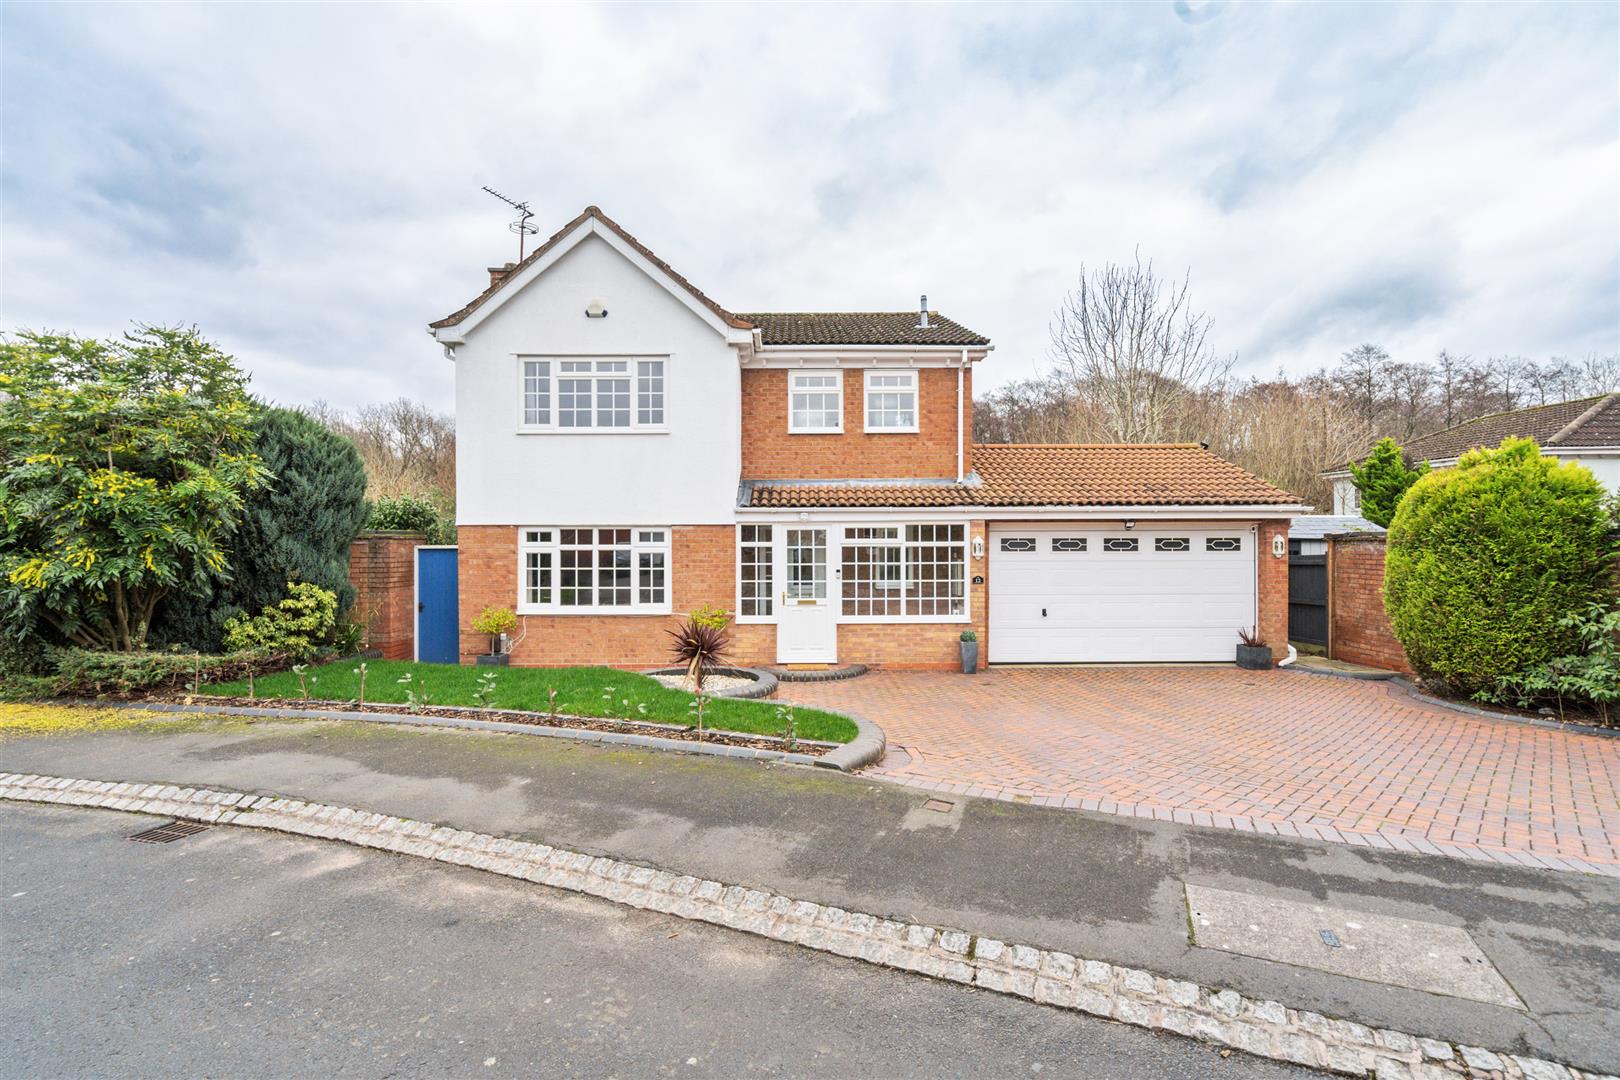 4 bed detached house for sale in Elmdon Coppice, Solihull  - Property Image 1